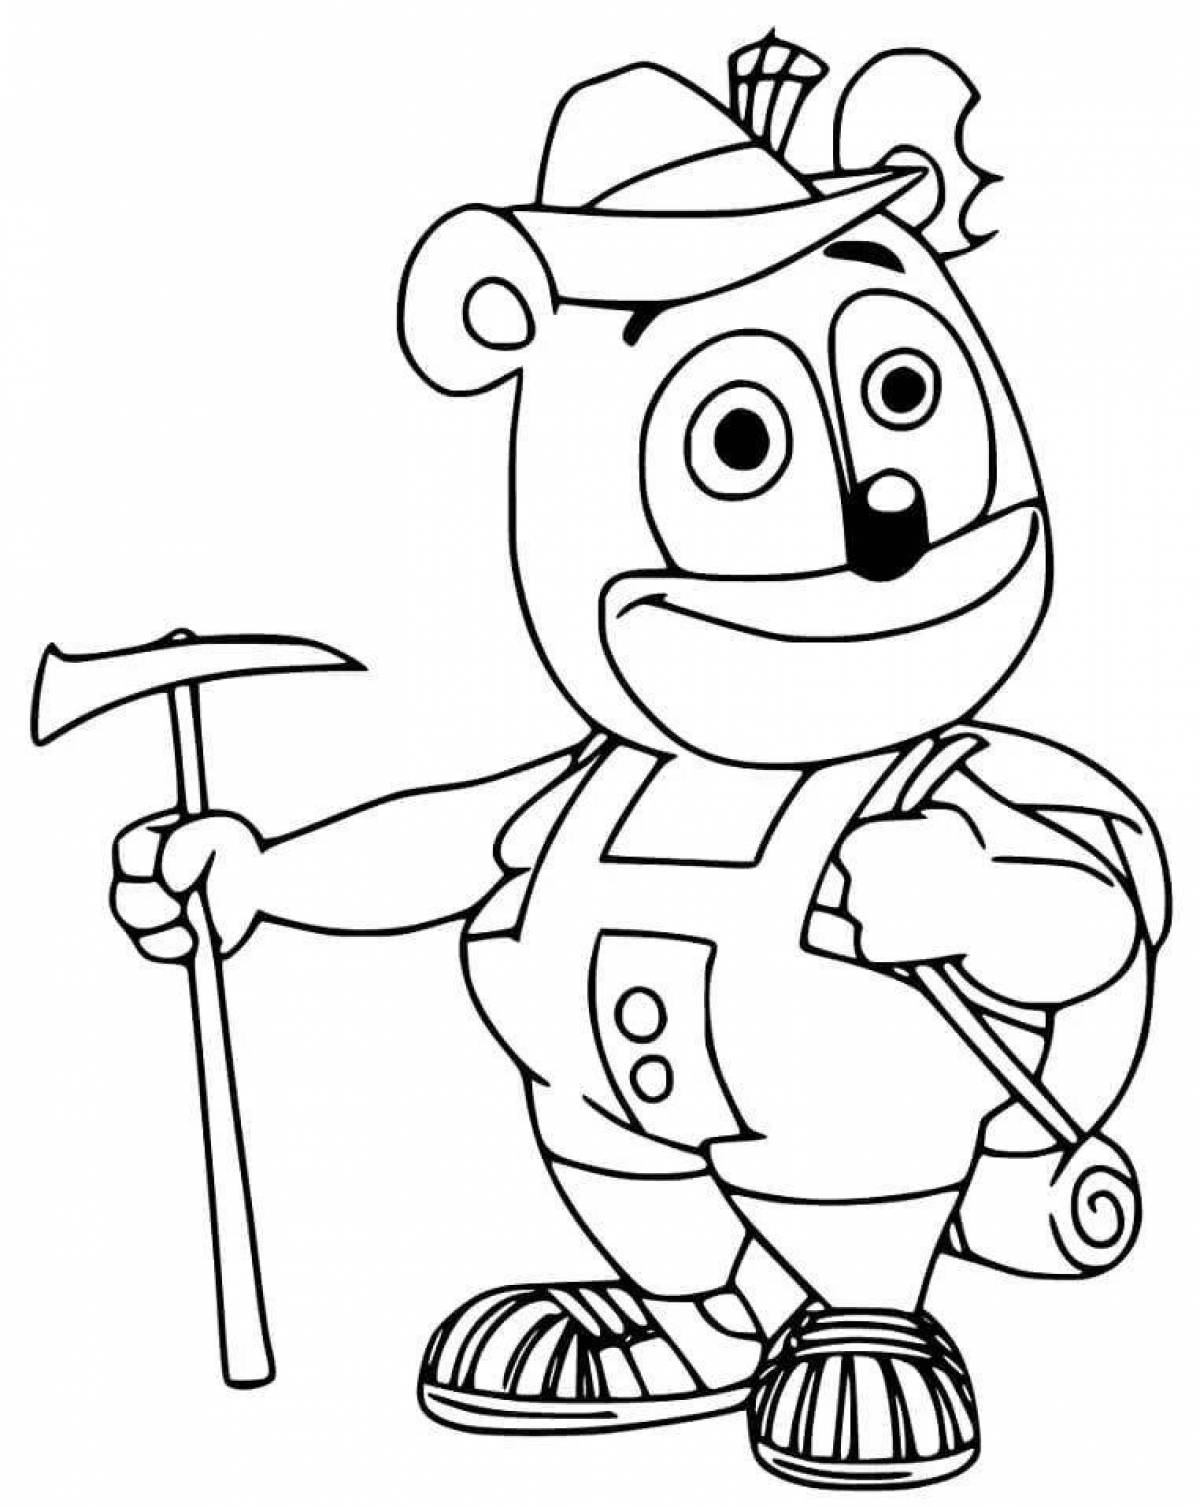 Gorgeous humber bear coloring page